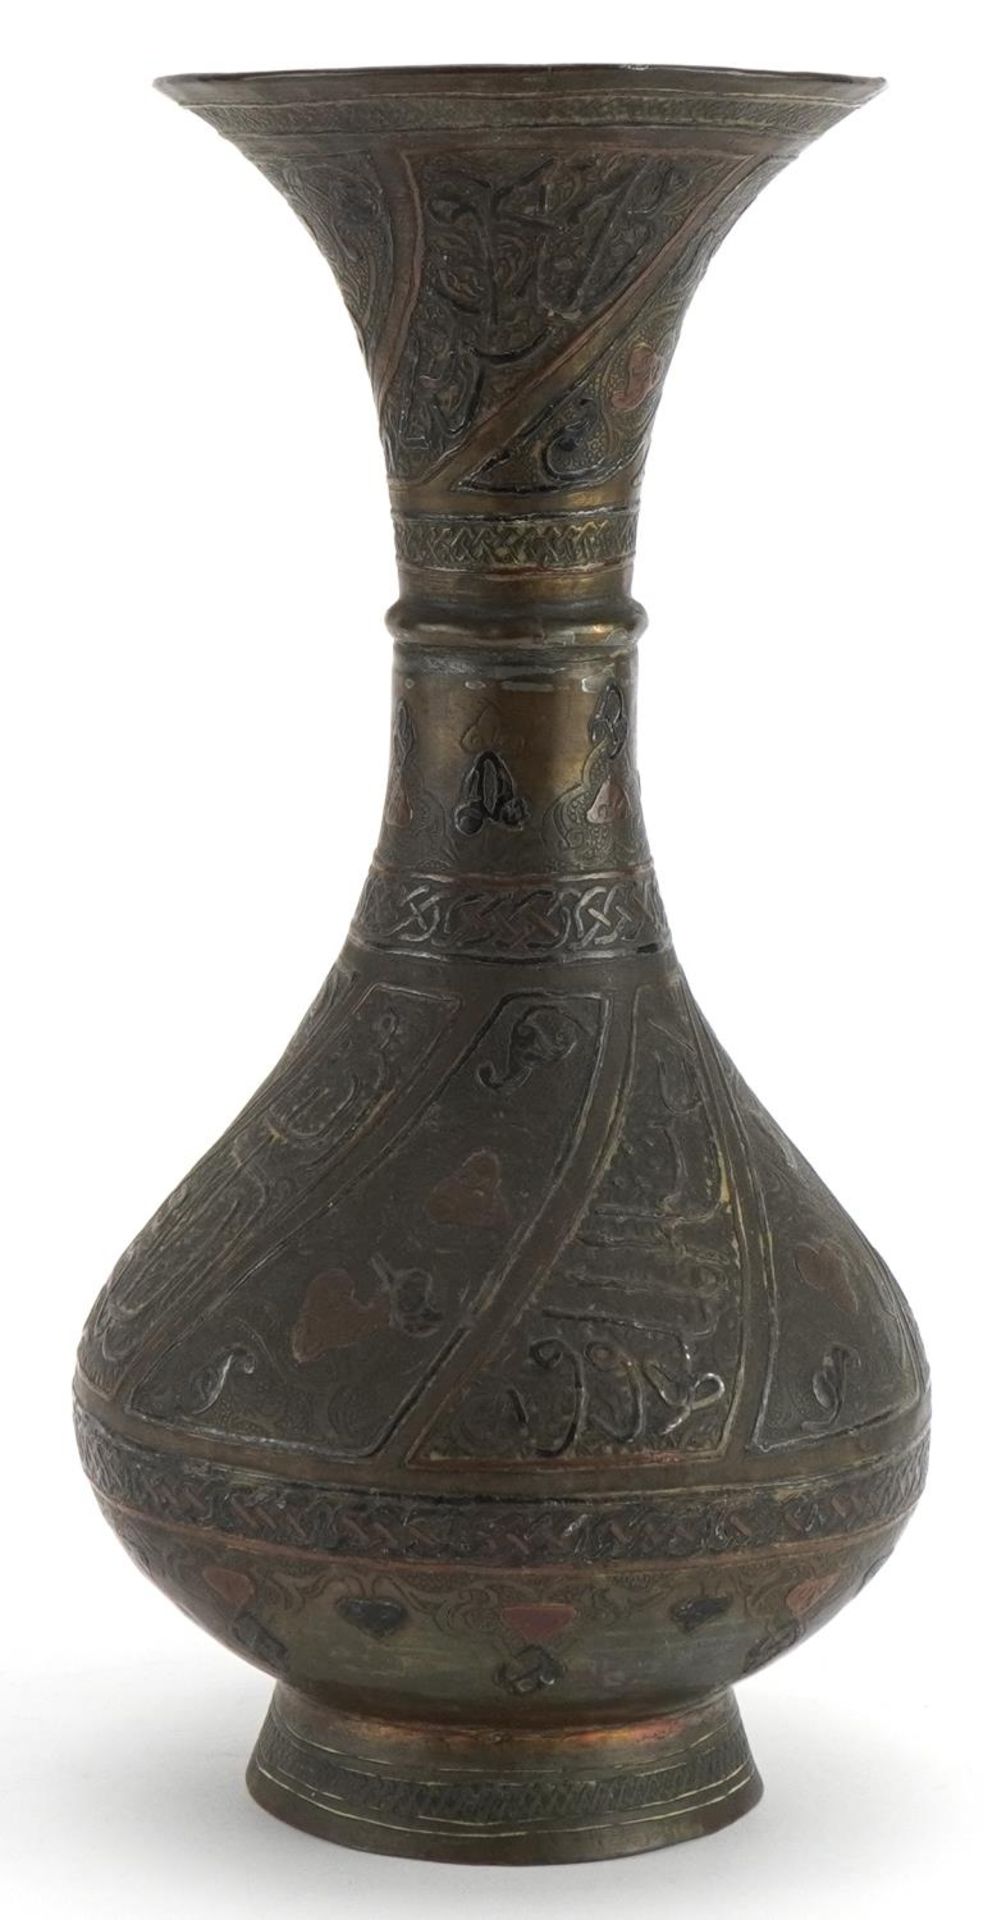 Islamic Cairoware brass vase with silver and copper inlay decorated with calligraphy and flowers, - Bild 2 aus 3